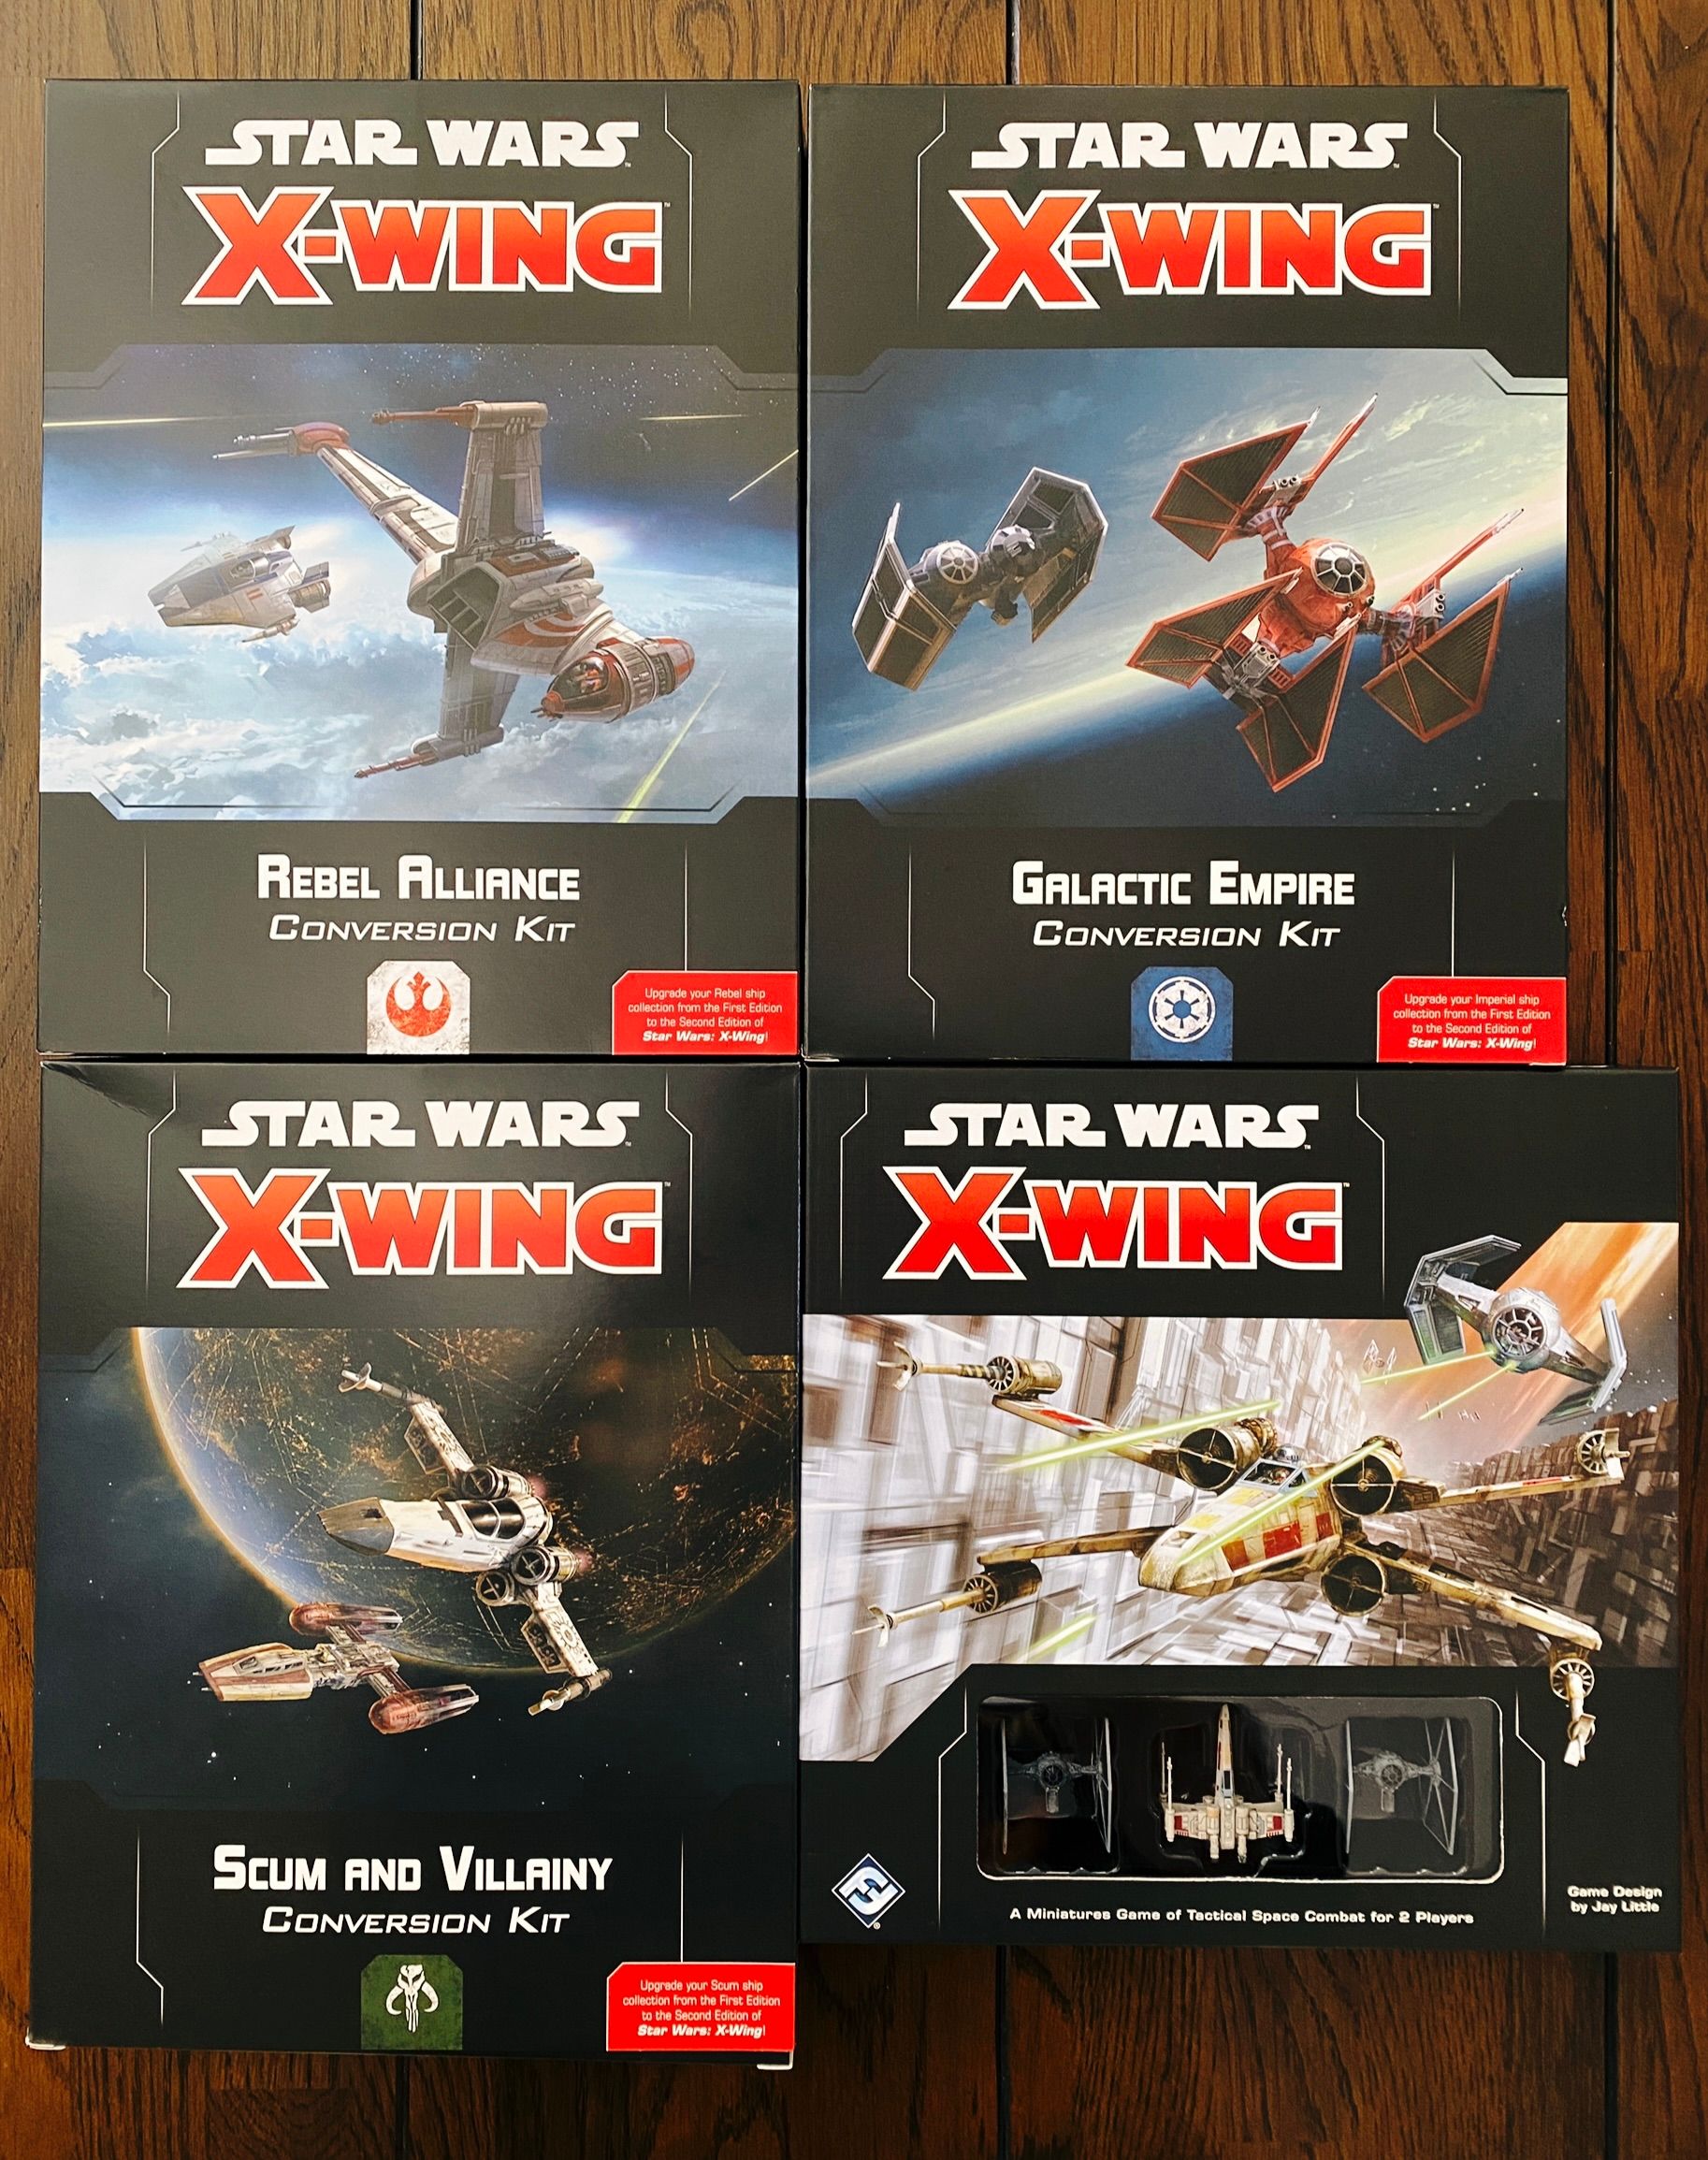 A photo of four boxes for the Star Wars miniatures game "X-wing". One is the 2nd Edition core set which has two TIE Fighters and one X-wing miniature in it. The other three boxes are conversion kits for the Rebel Alliance, Galactic Empire, and Scum and Villainy factions that contain all the tokens and cards and other things needed to use the ships you'd bought for 1st Edition with the new 2nd Edition rules.